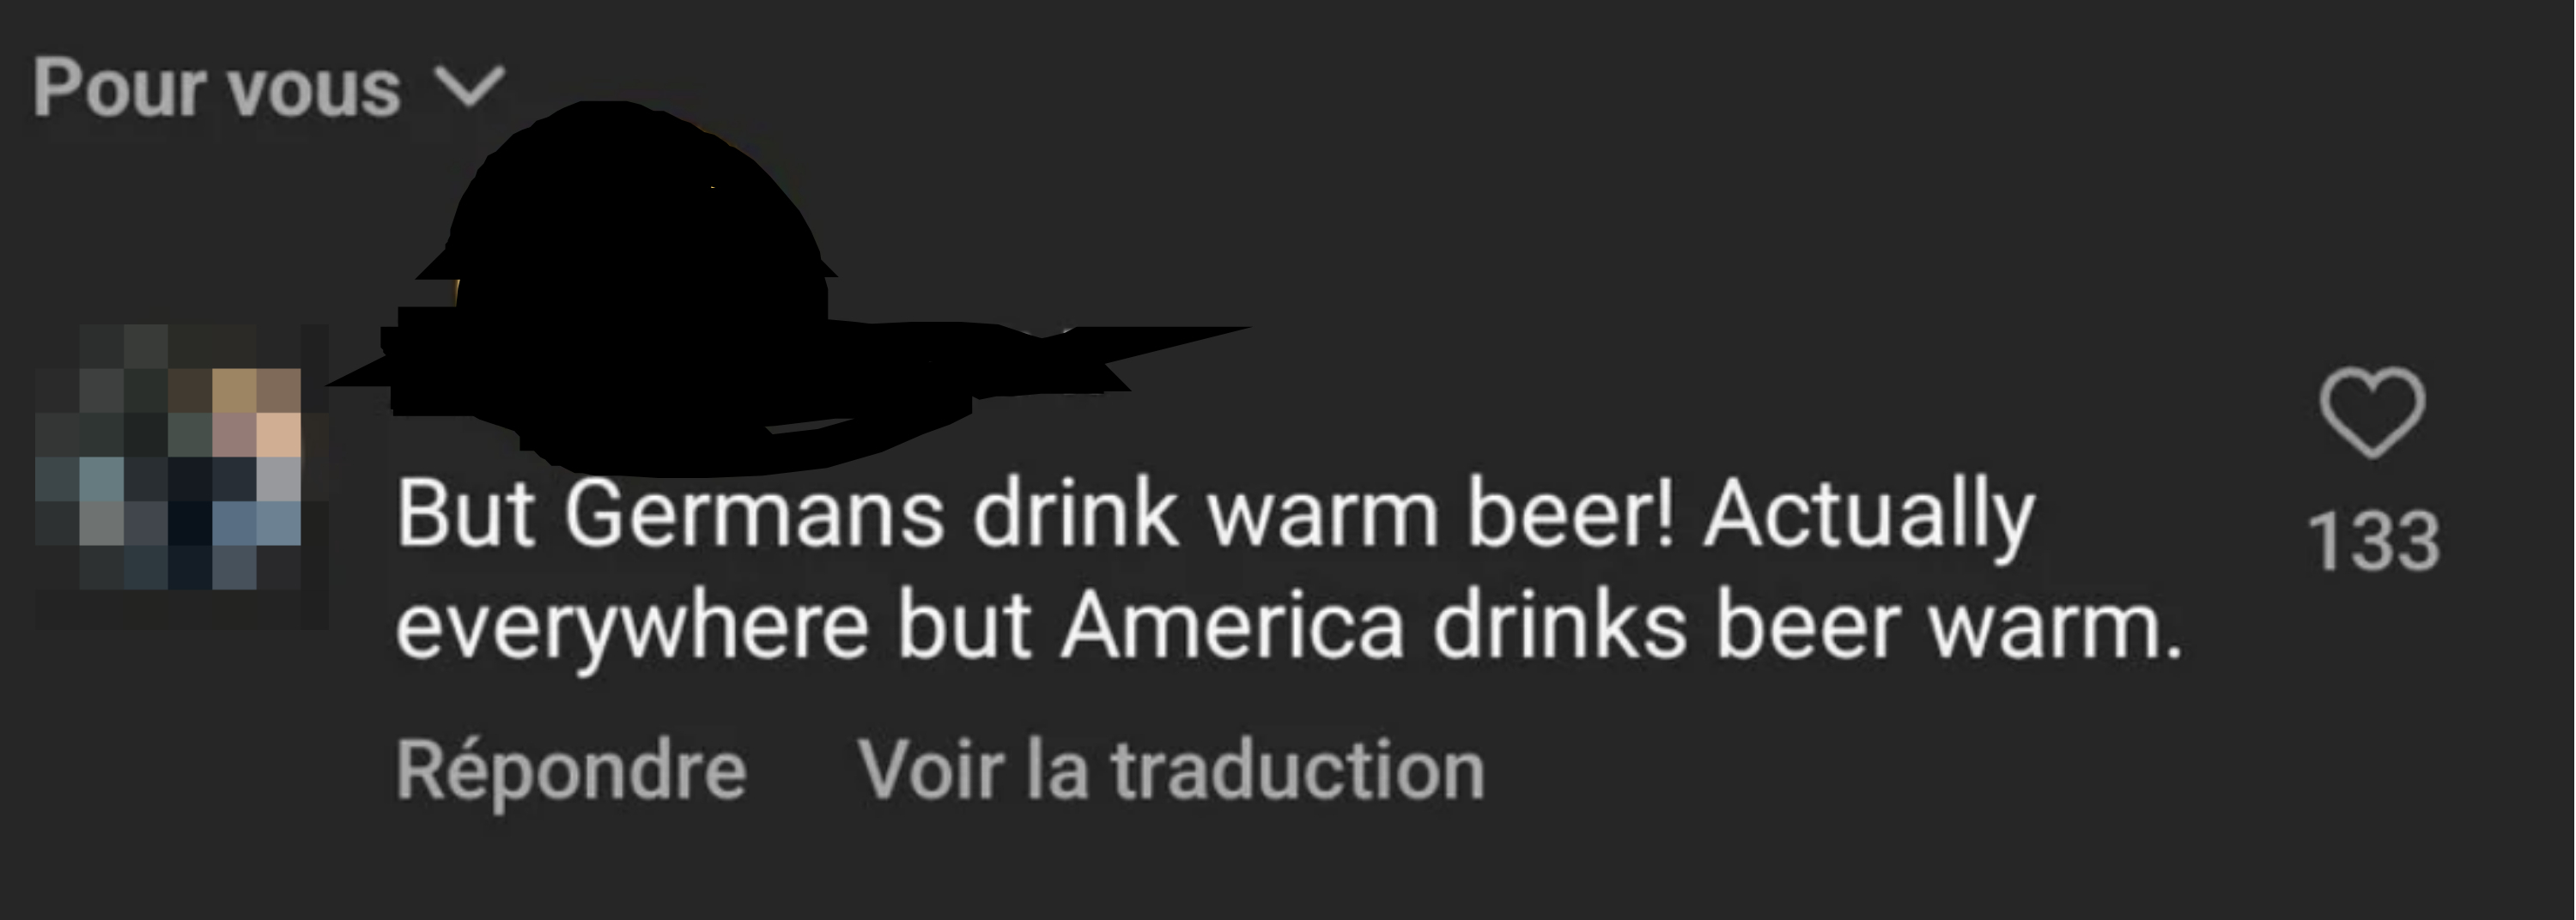 Social media screenshot of a comment saying &quot;But Germans drink warm beer! But everywhere but America drinks beer warm.&quot;